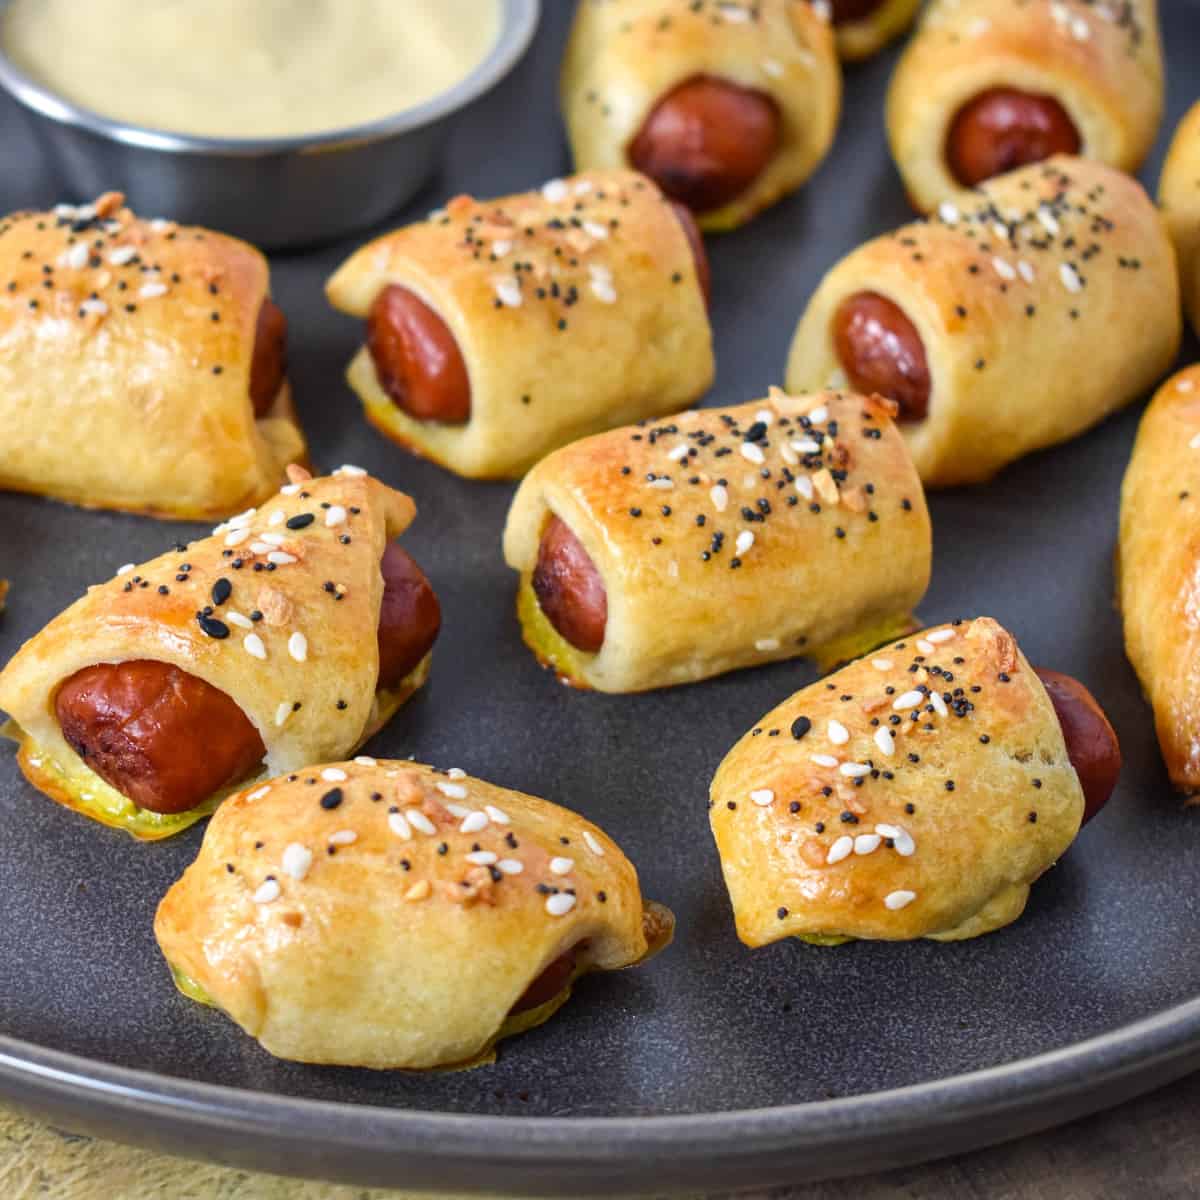 The pigs in a blanket arranged on a gray platter served with a side of mustard.